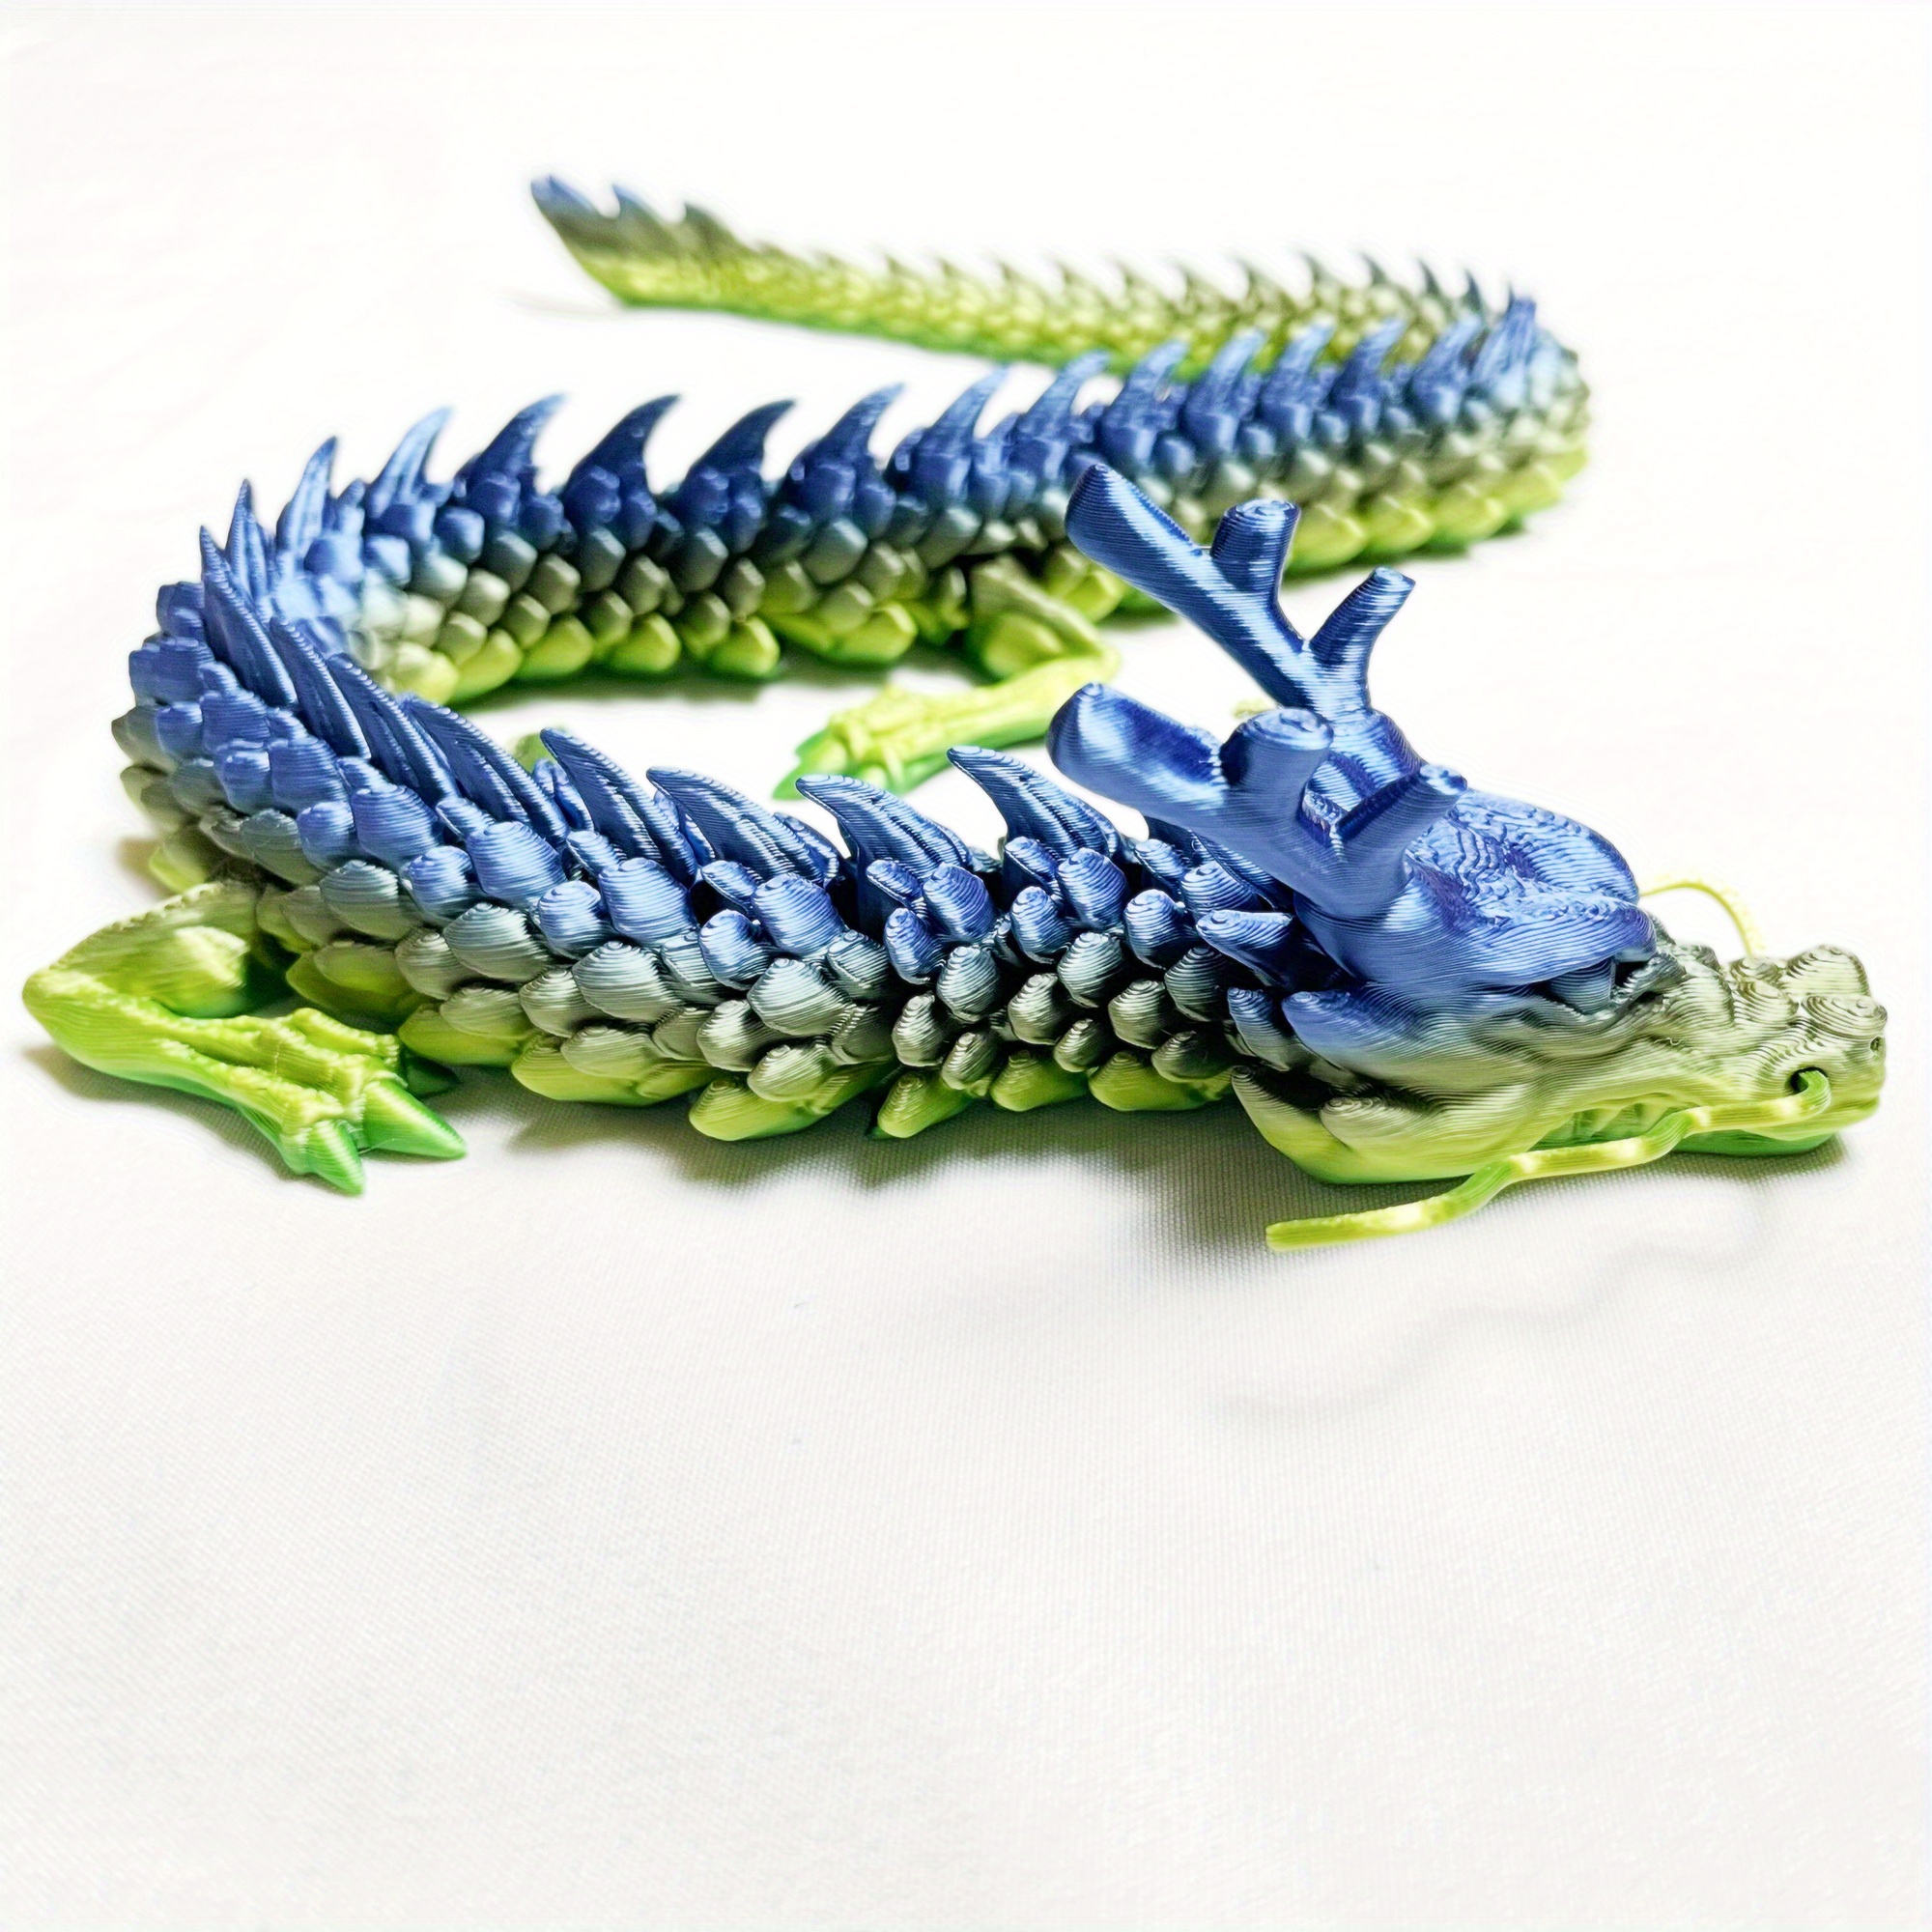 JABECODIFA 3D Printed Dragon Action Figures with Flexible Joints,  Articulated Flexi Crystal Dragon Fidget Toy Dragon Toys Animal Figurines  for